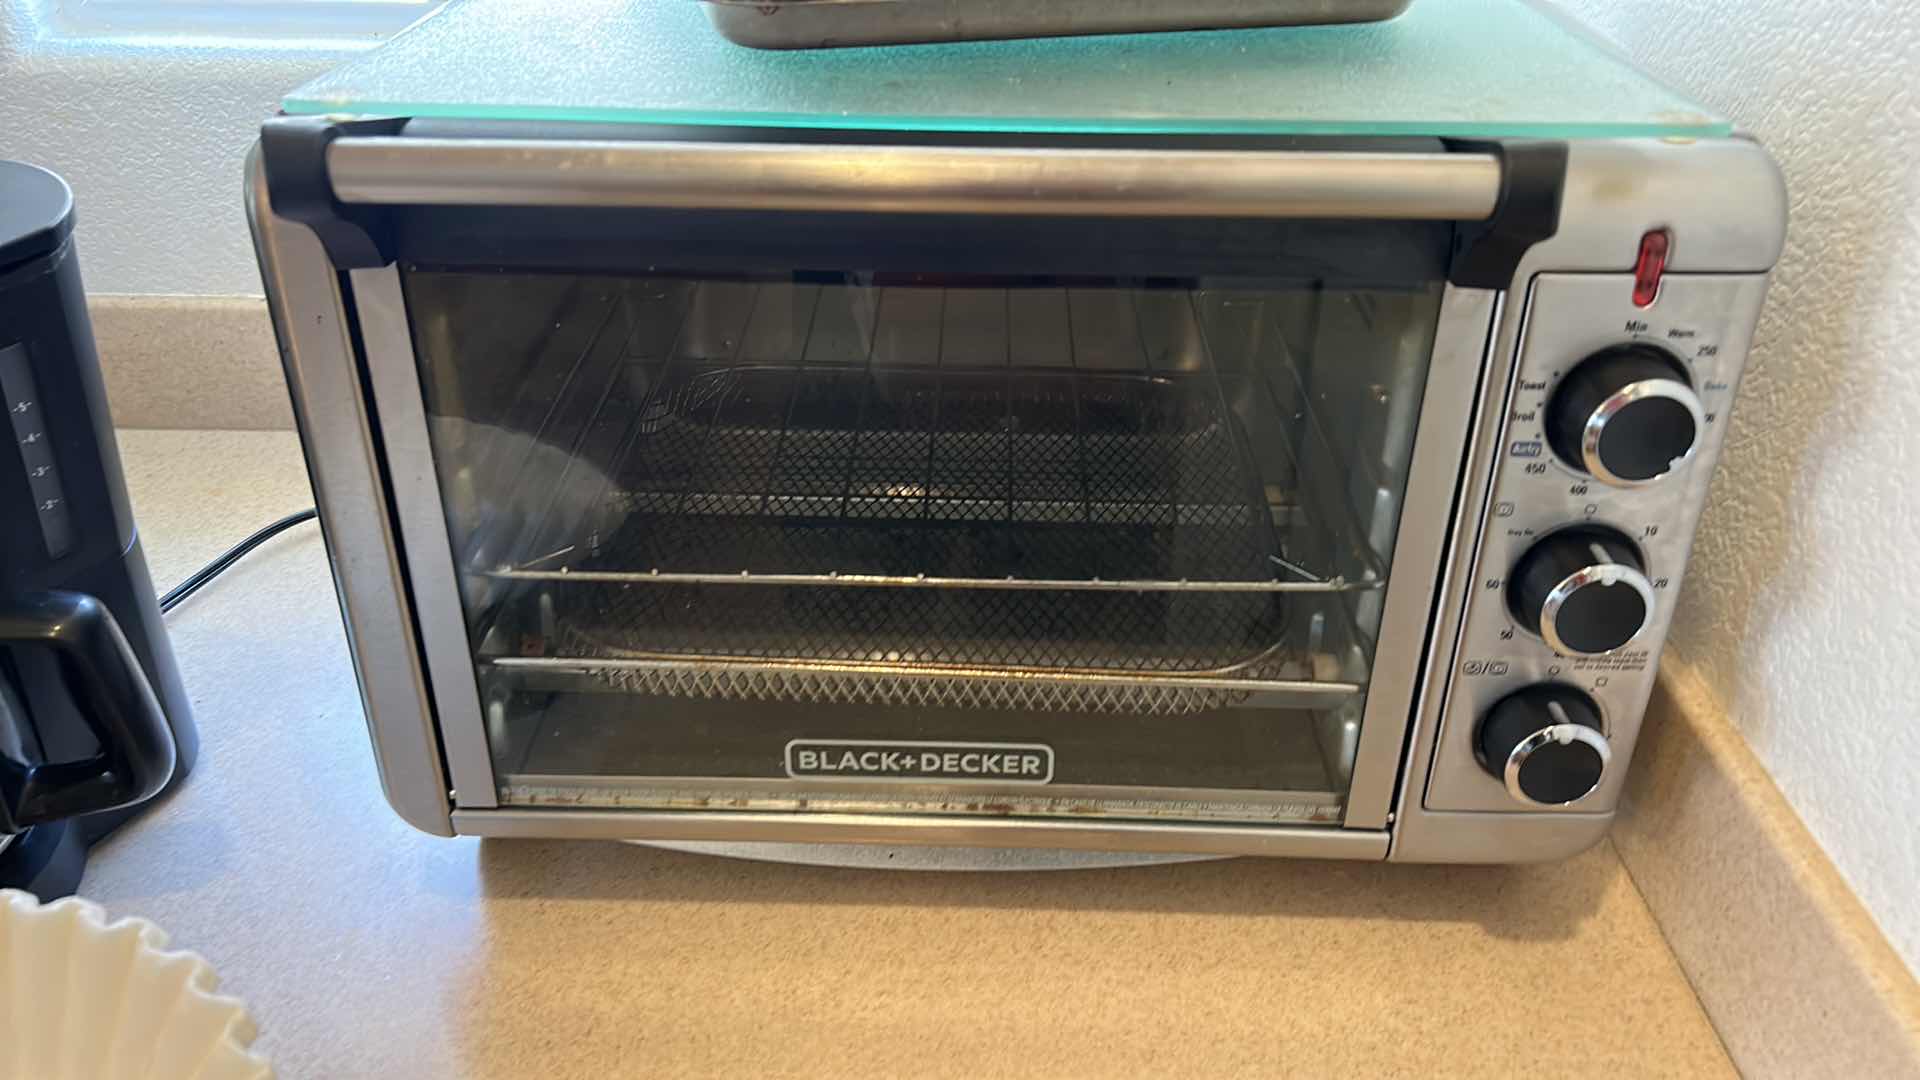 Photo 4 of KITCHEN APPLIANCES - BLACK AND DECKER TOASTER OVEN, COFFEE MAKER AND ACCESSORIES